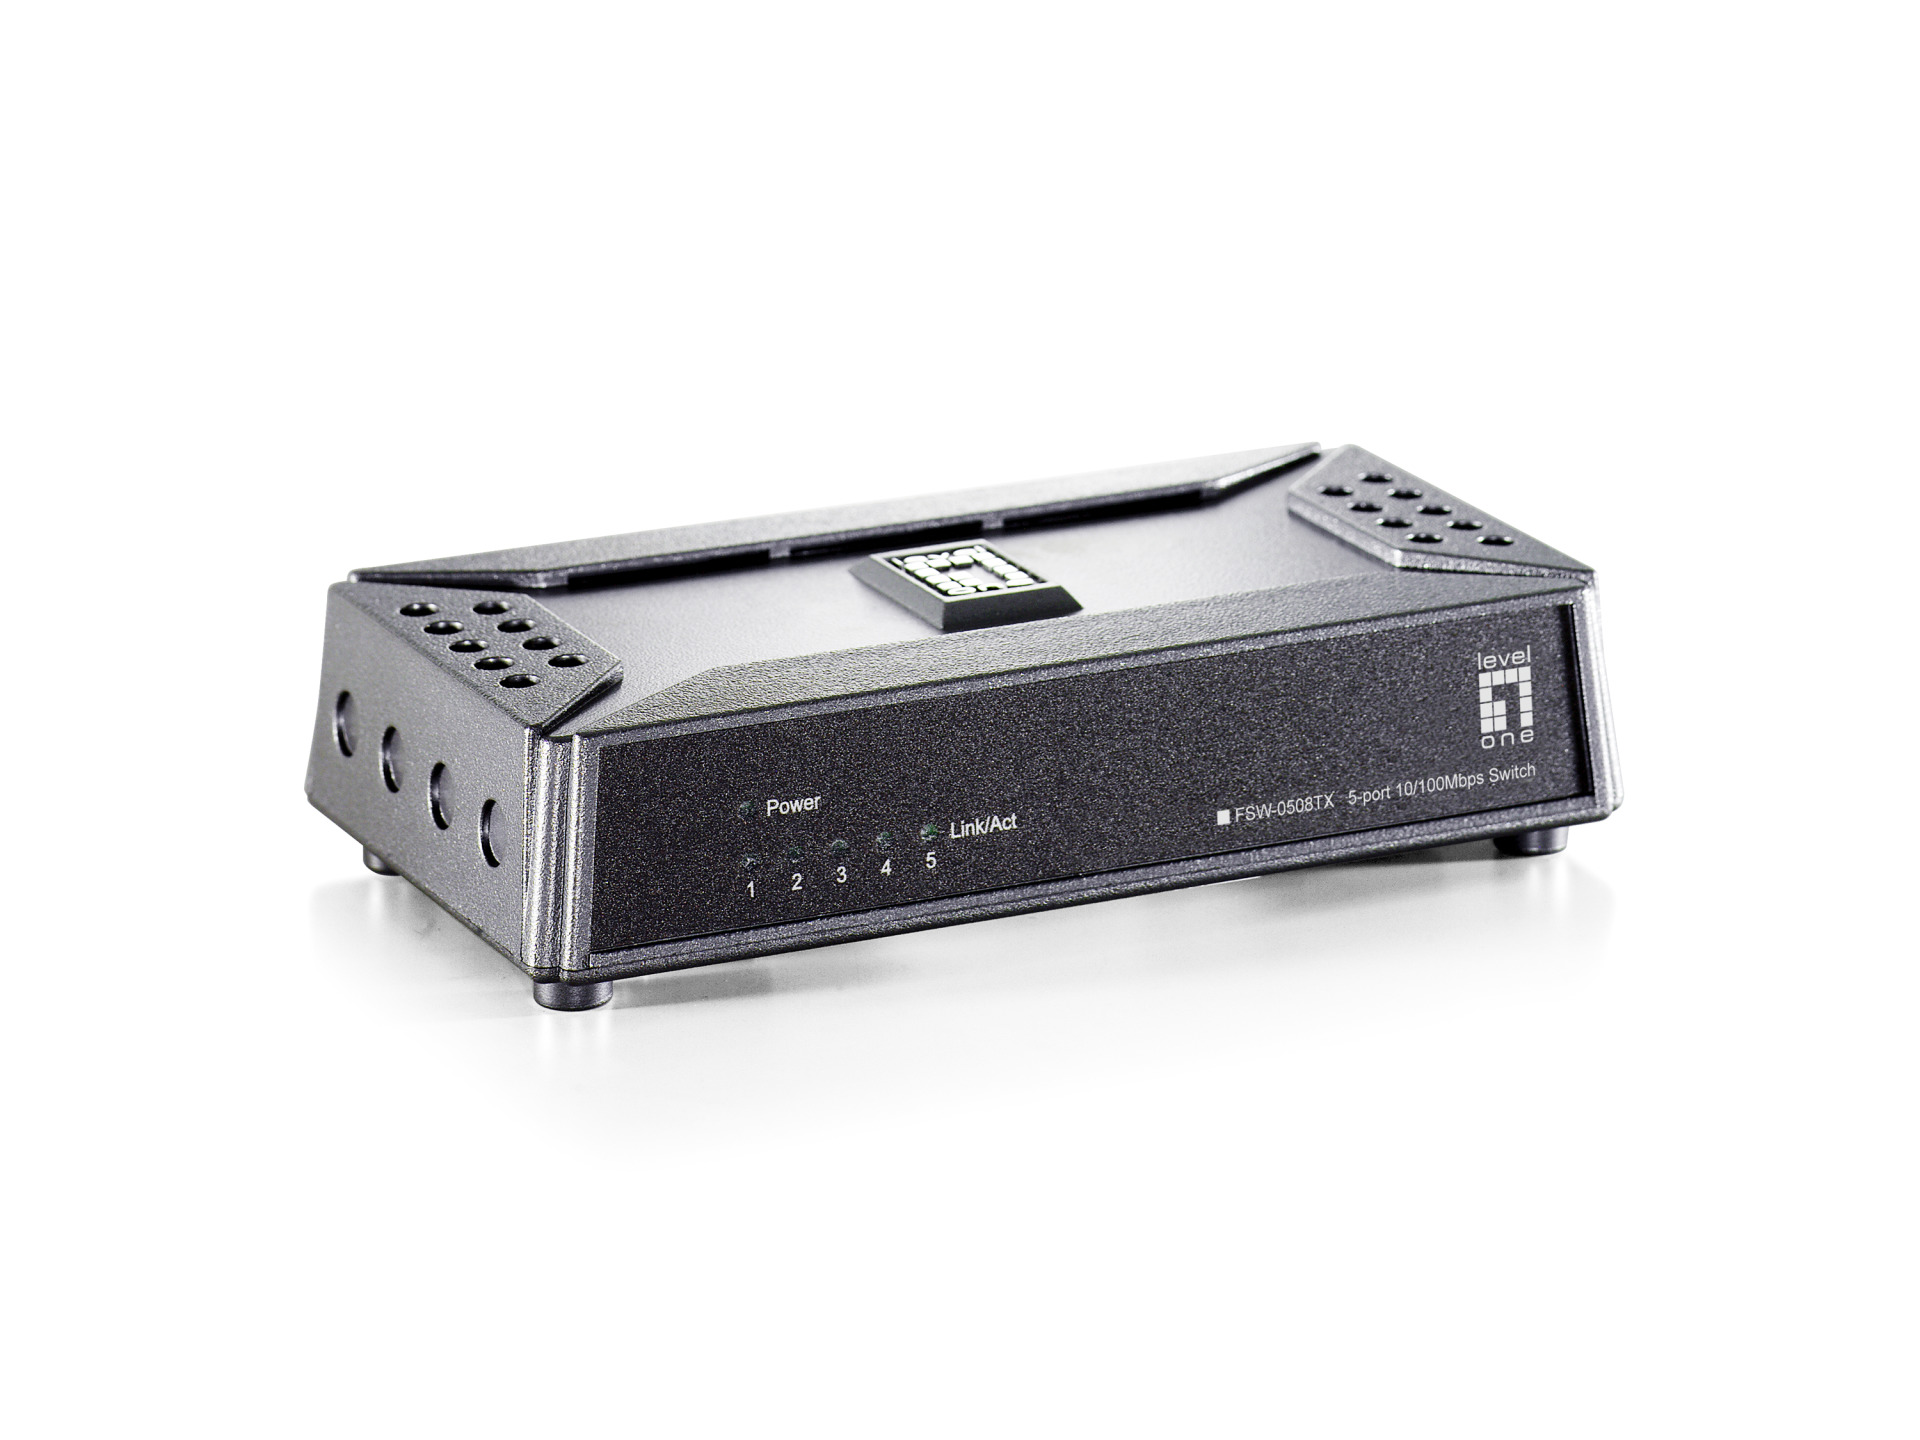 5-Port Fast Ethernet Switch, ultracompact